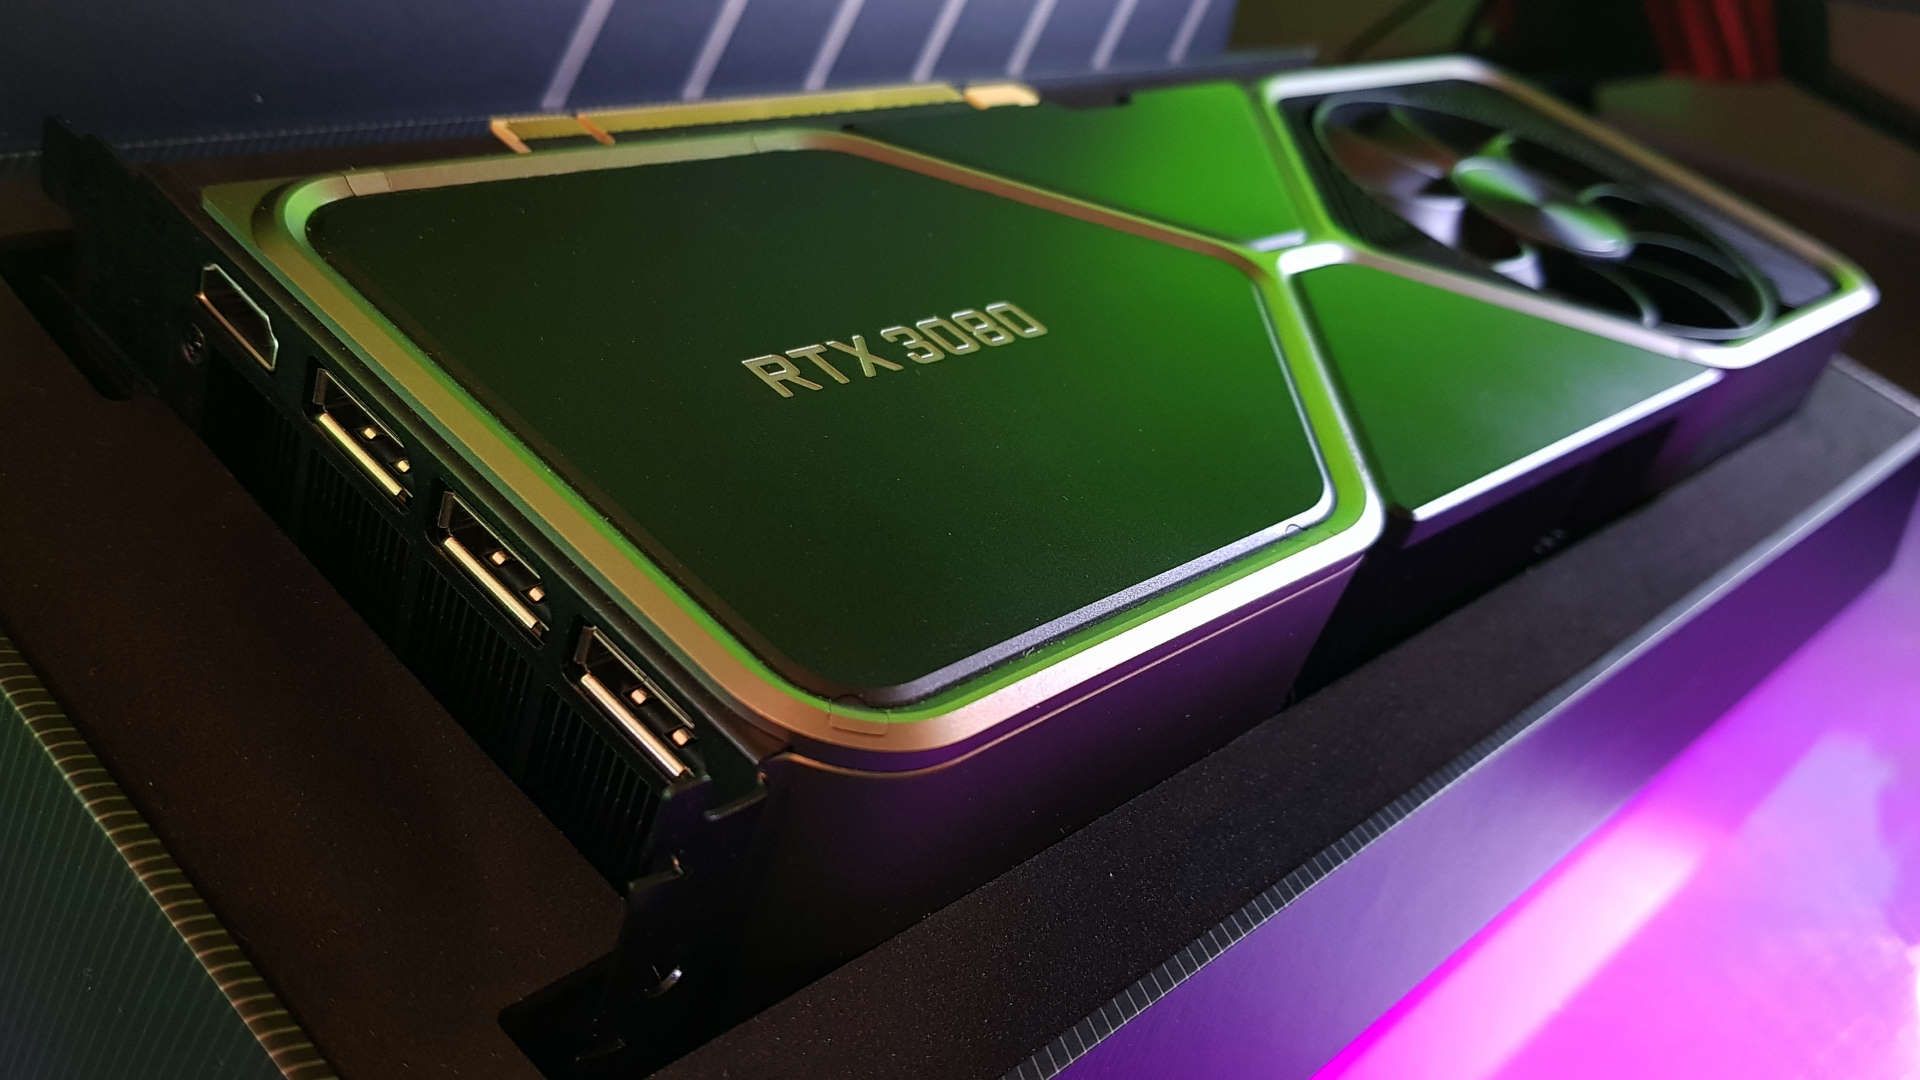 Nvidia's RTX 3080 is in the test rig right now but I can't take my eyes off its white LEDs